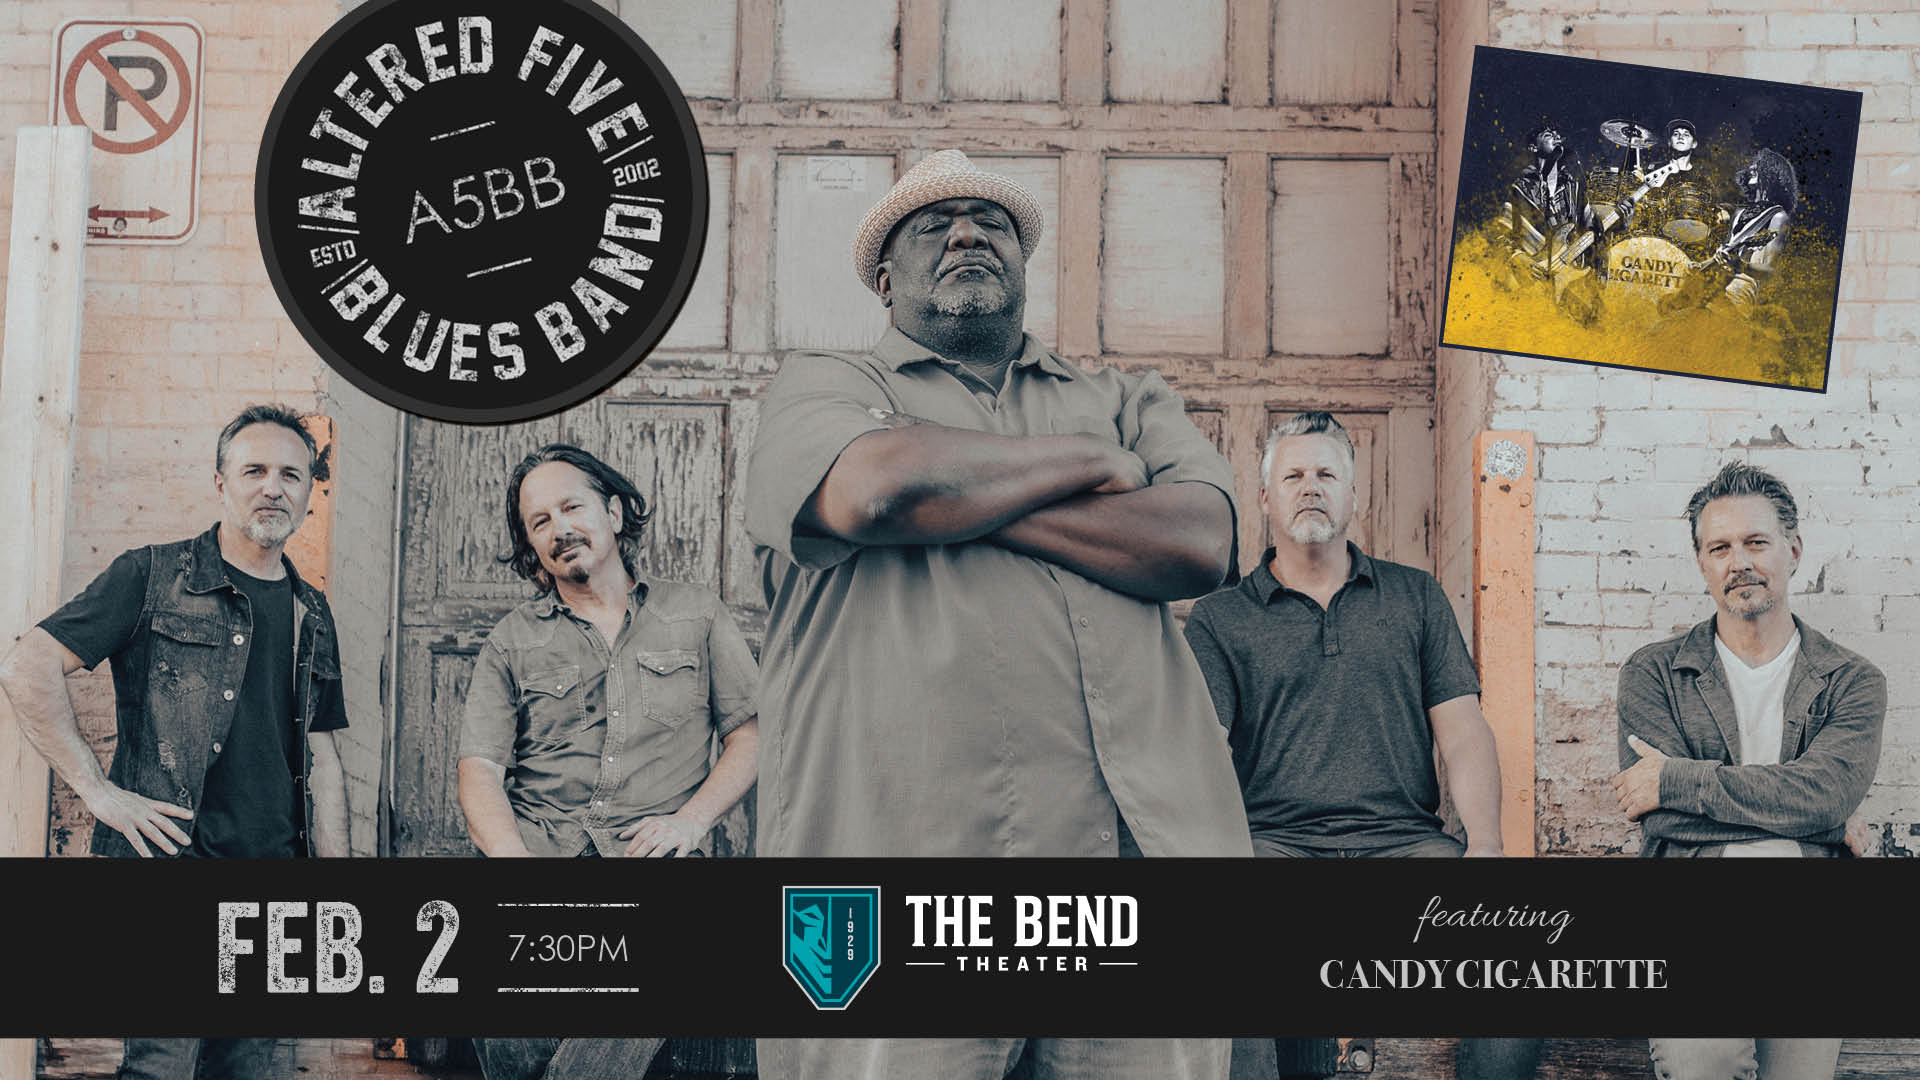 Altered Five Blues Band featuring Candy Cigarette at The Bend Theater